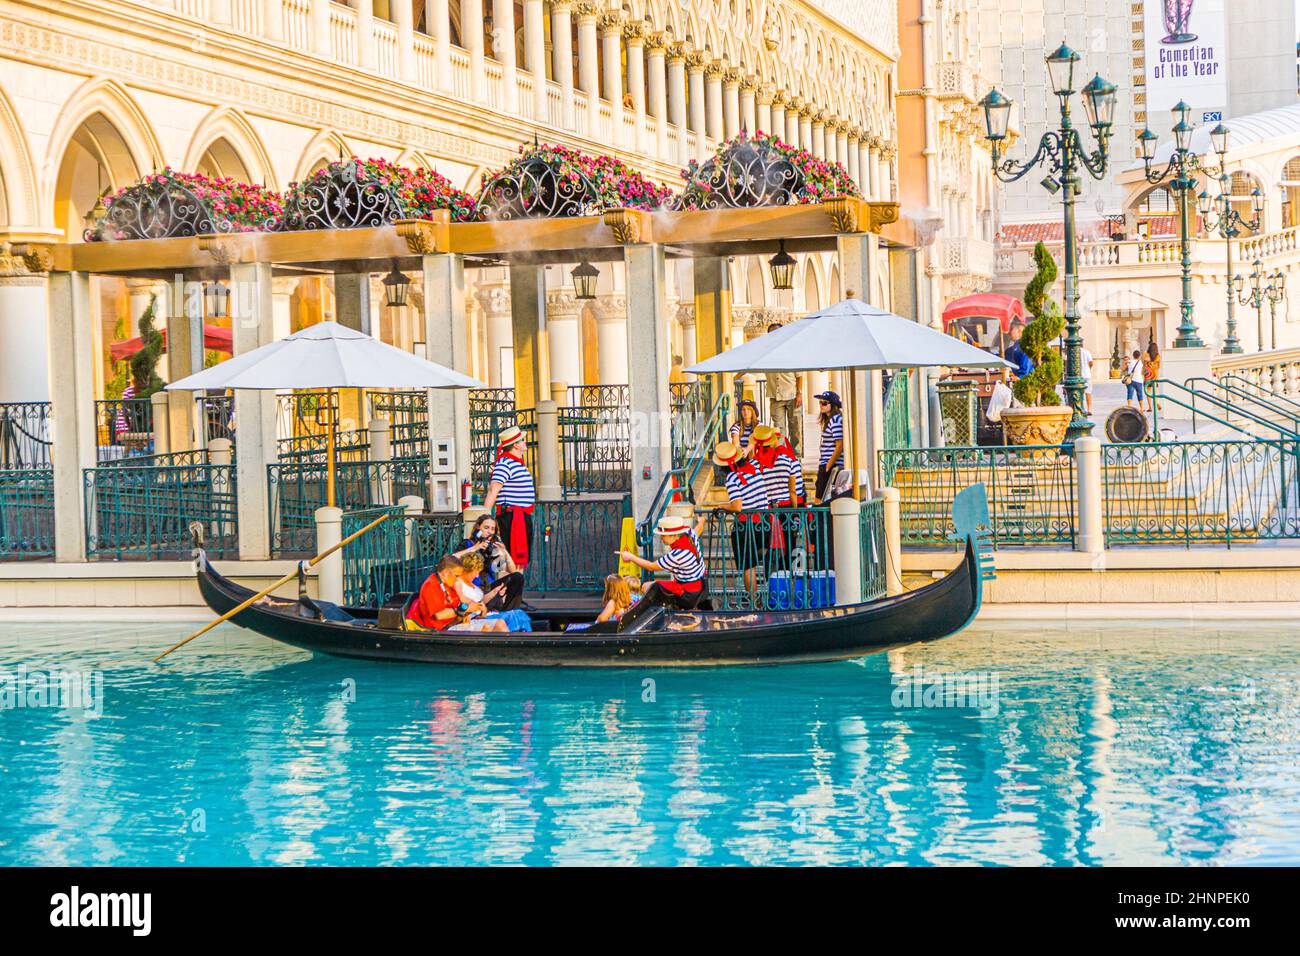 gondola with tourists at The Venetian Resort Hotel & Casino The resort opened  1999 with flutter of white doves, sounding trumpets and singing gondoliers Stock Photo